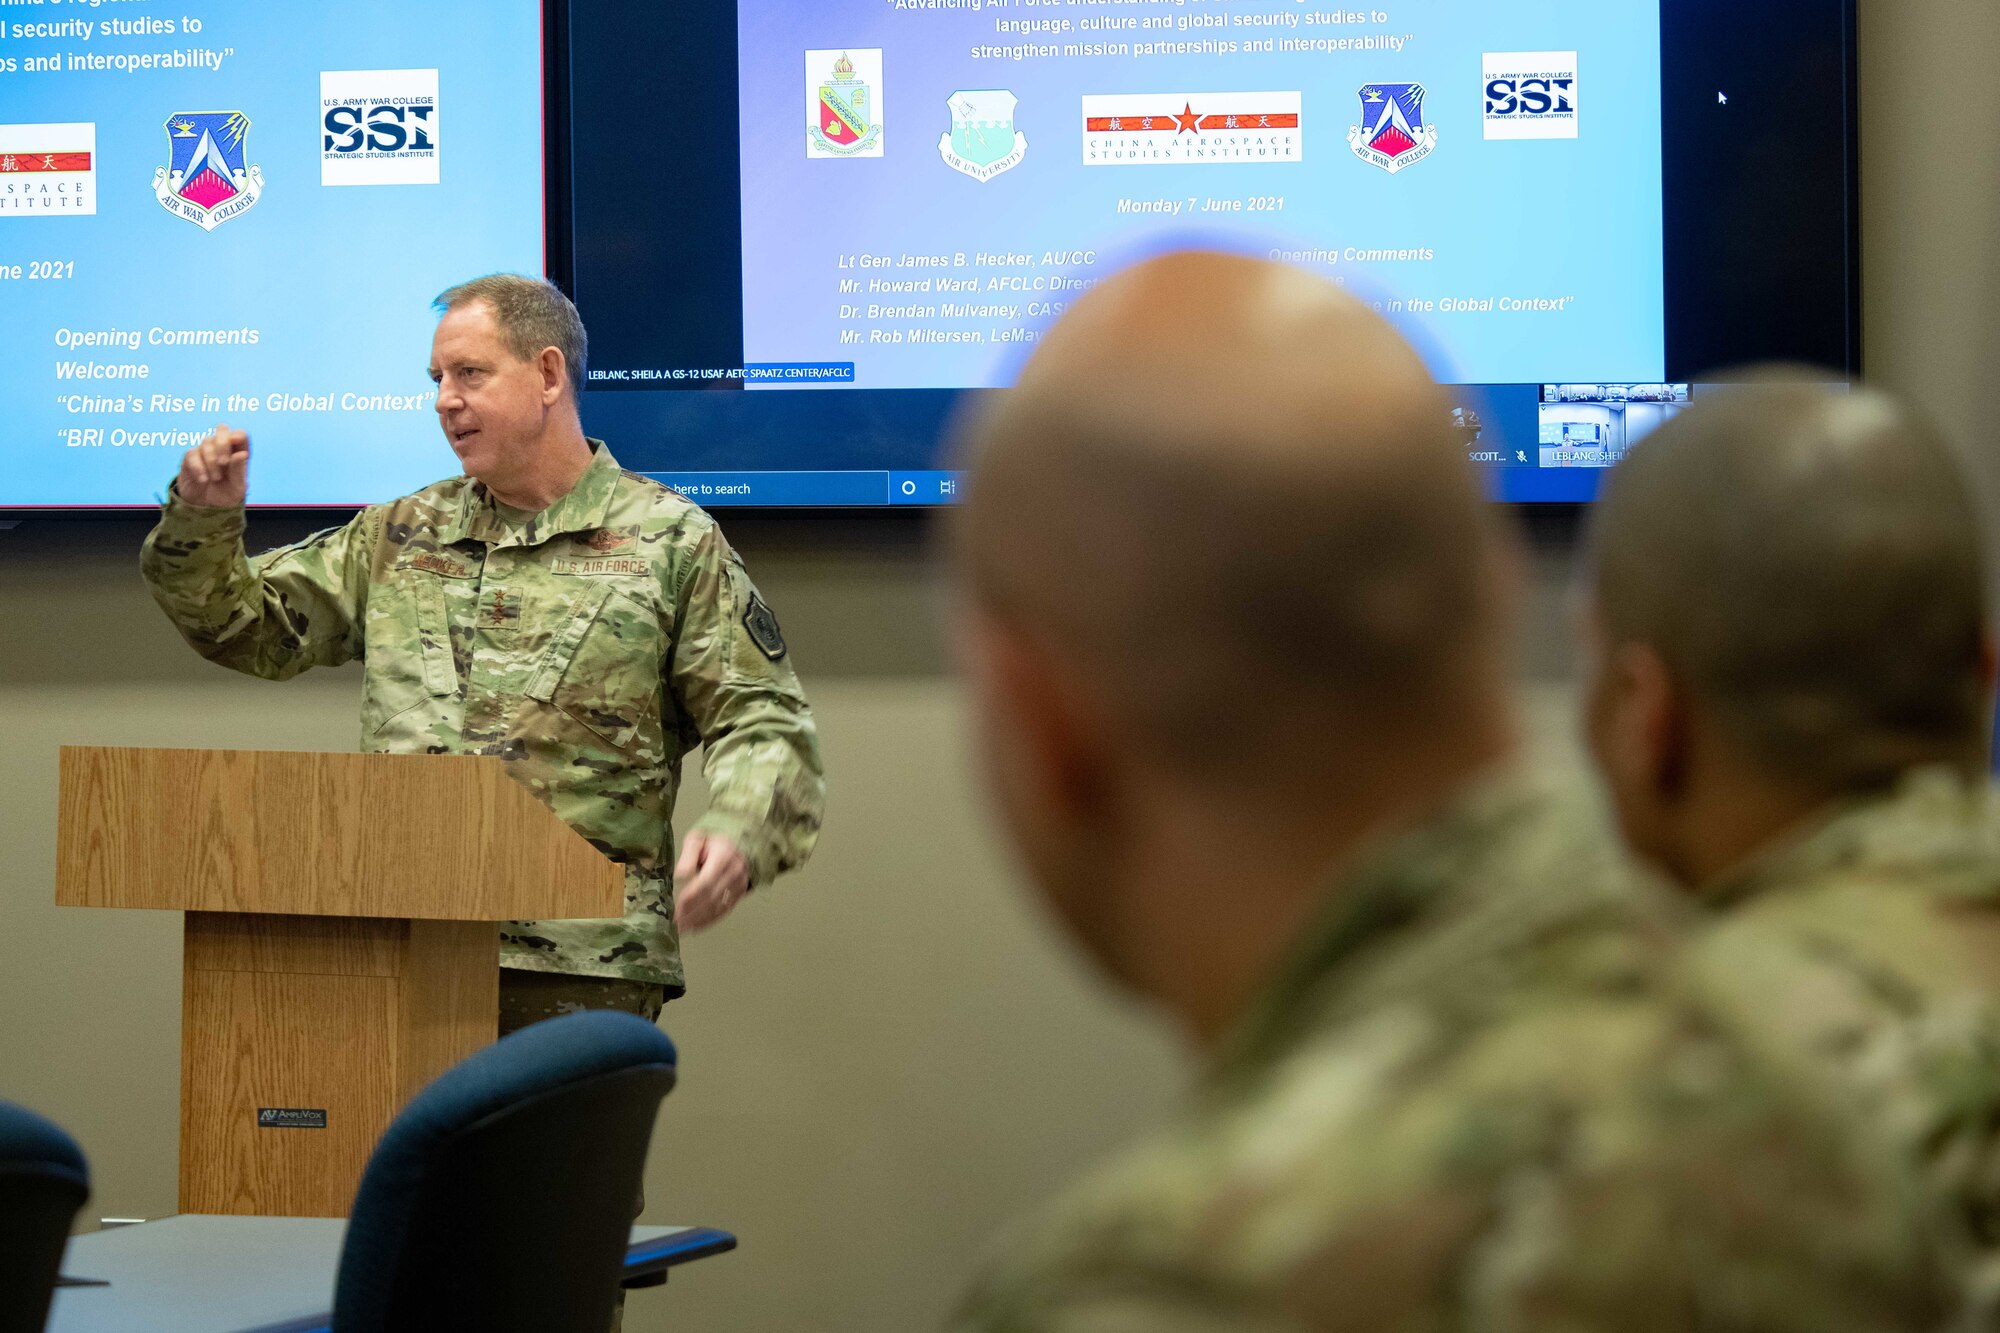 Lieutenant Gen. James Hecker, Air University commander and president, opens the inaugural China ‘Belt and Road Initiative’ training event, June 7, 2021, at the AU Teaching and Learning Center, Maxwell Air Force Base, Alabama. During the Language Intensive Training Event, June 7-18, 2021, an elite group of Language Enabled Airmen Program Scholars will dissect the Great Power Competition between the United States, Russia and China to get a better understanding of the ambitions of these strategic world powers. (U.S. Air Force photo by Melanie Rodgers Cox)